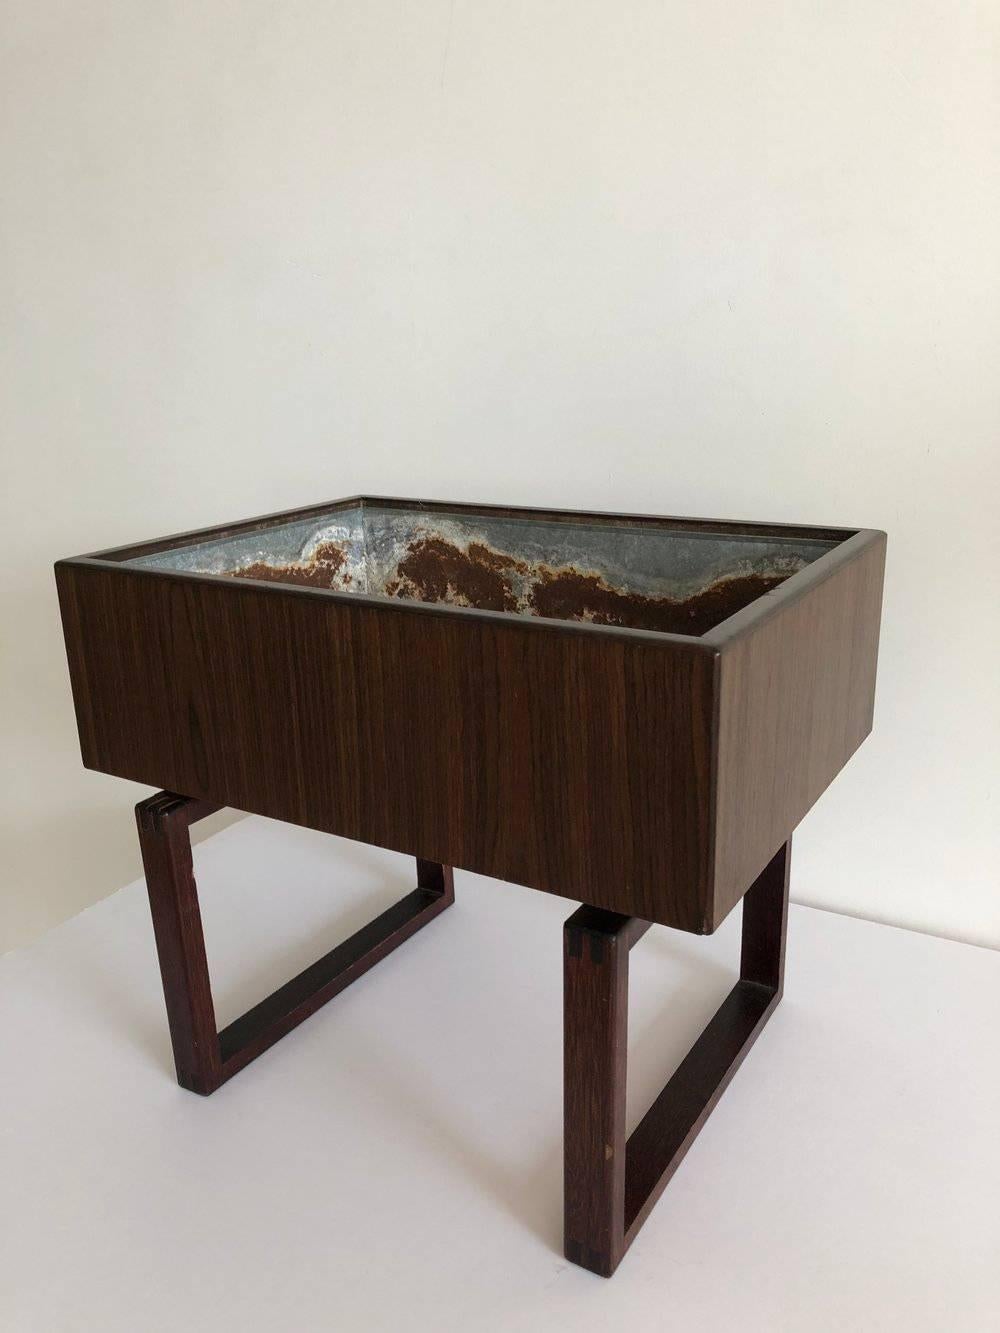 1960s Danish Kai Kristiansen for Salin Mobler Rosewood Planter In Excellent Condition For Sale In Brooklyn, NY